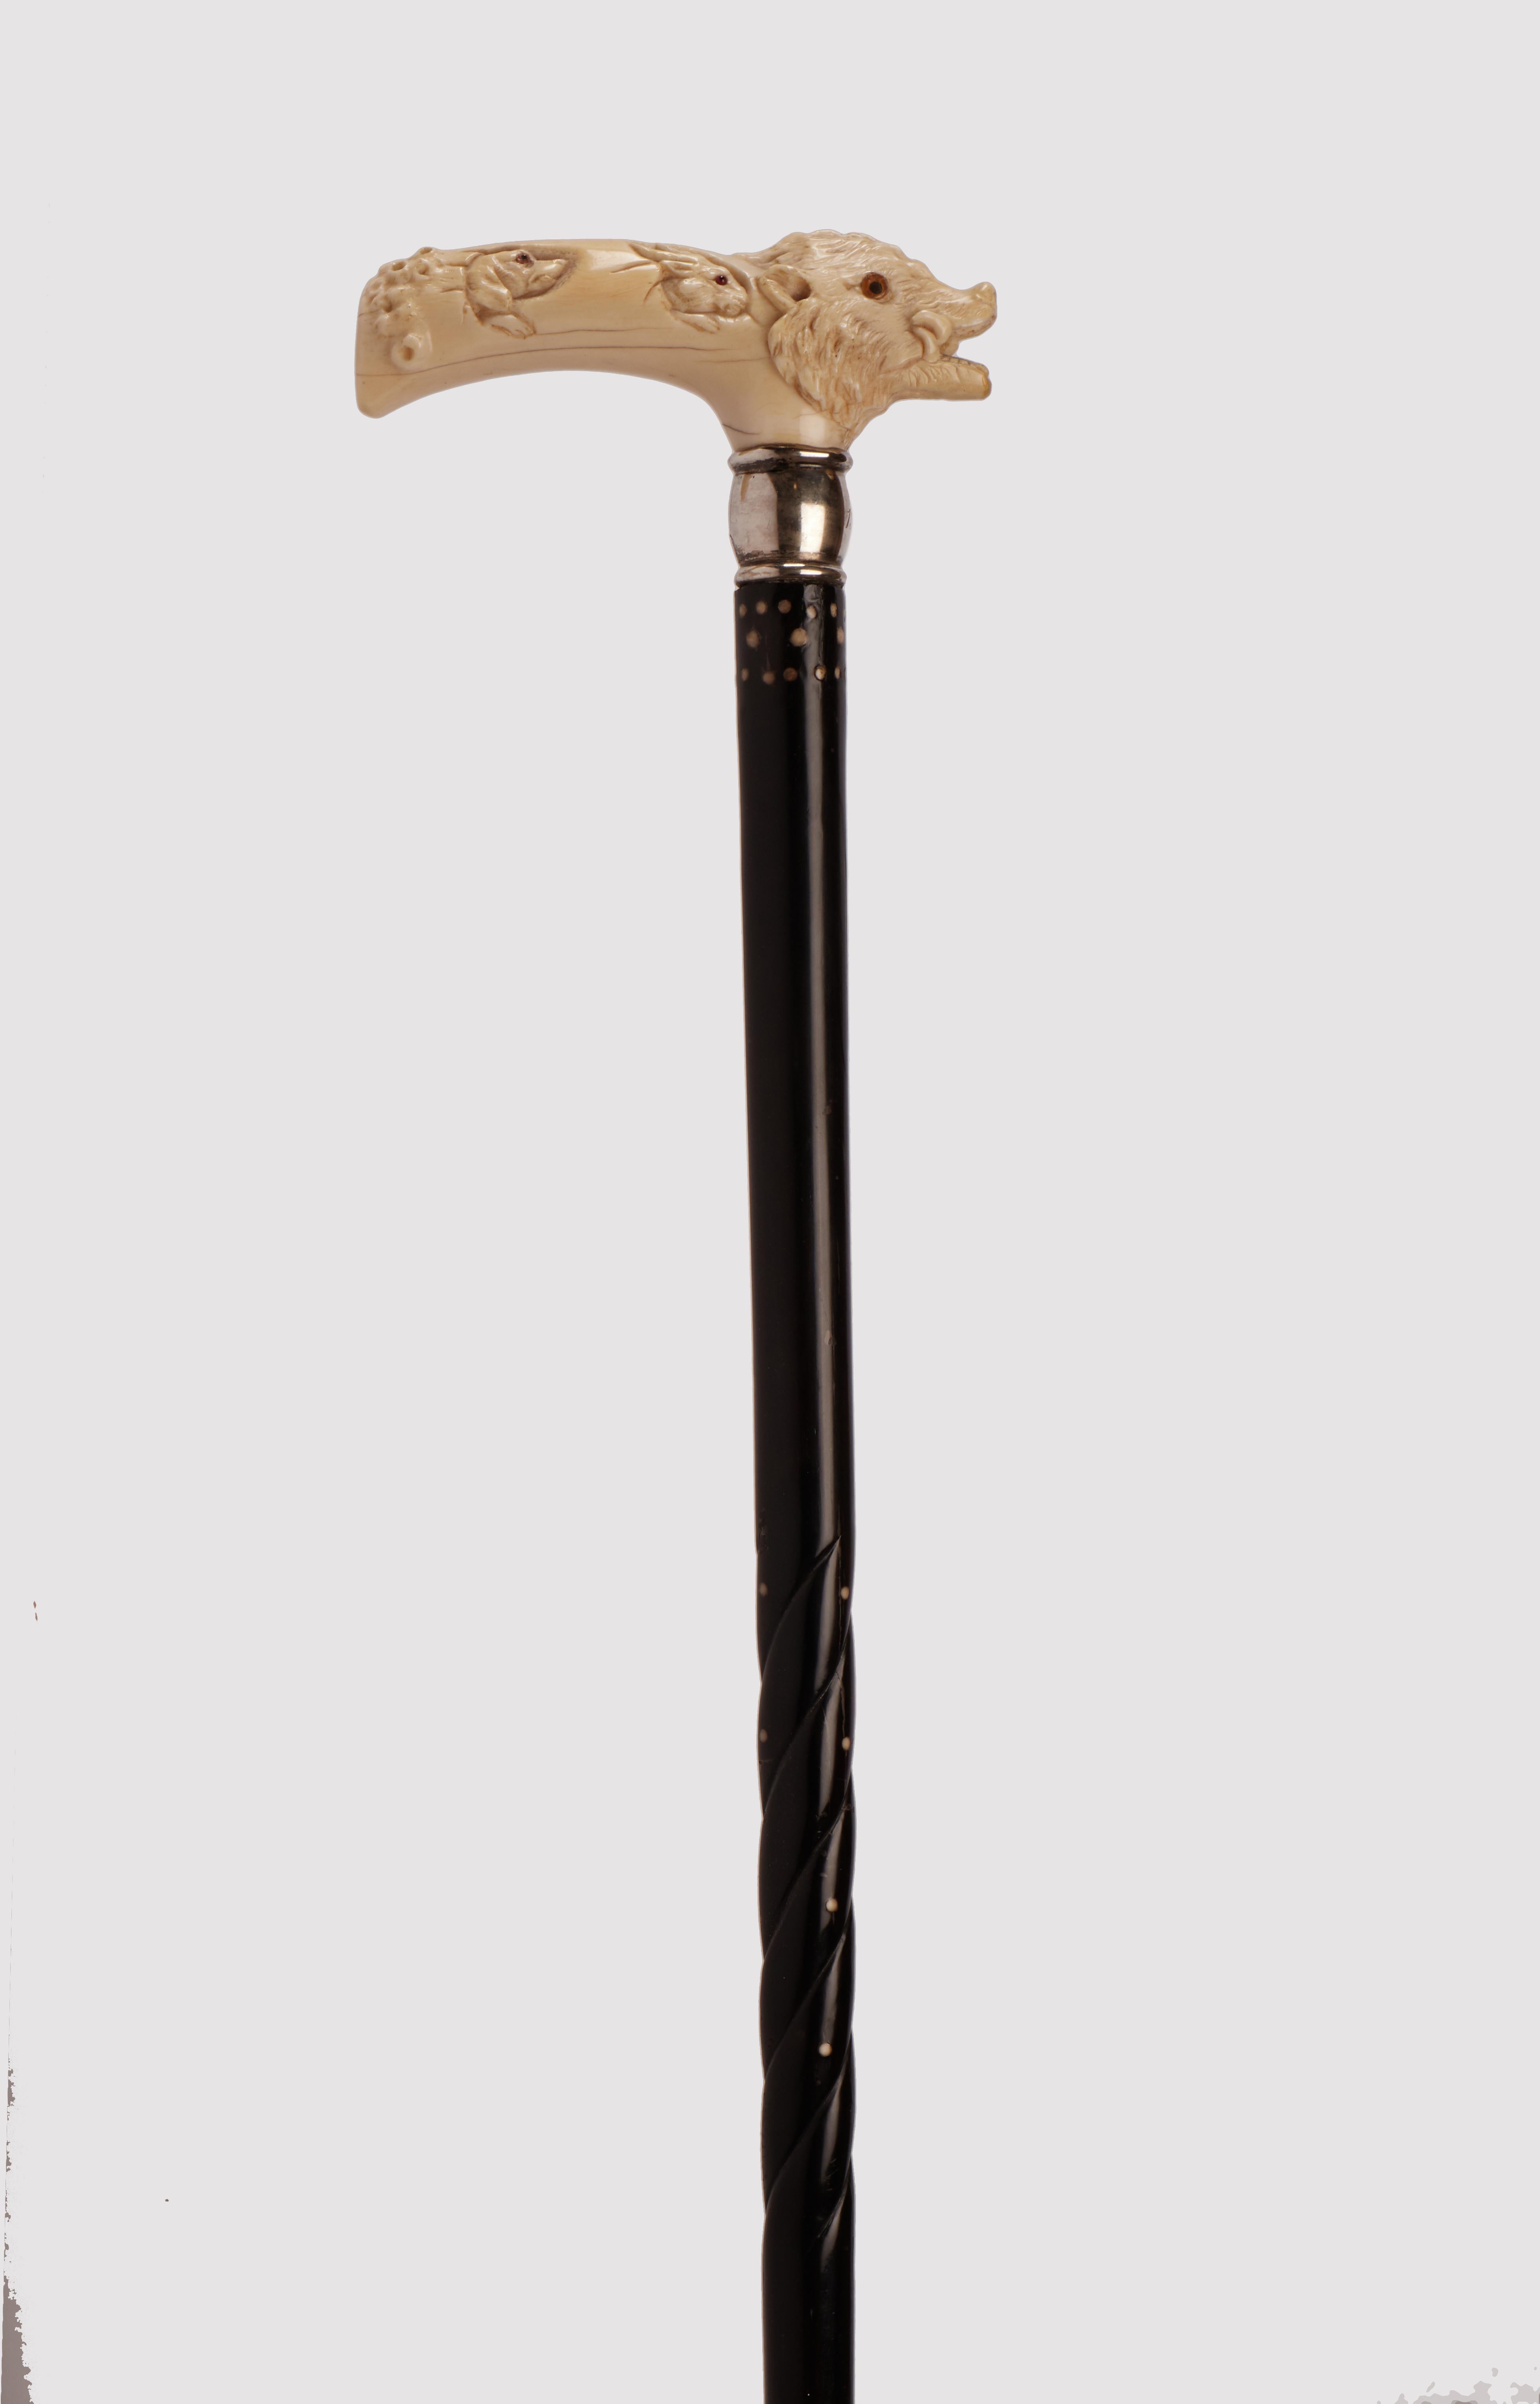 Walking stick: ivory carved handle depicting a wild boar with arrow in its mouth, a dog head, an hare and a native america hunting a boar. Sulphur glass eyes. Shaft ebony wood with ivory knobs. Silver ring. Metal ferrule. USA circa 1910. 
(SHIP TO